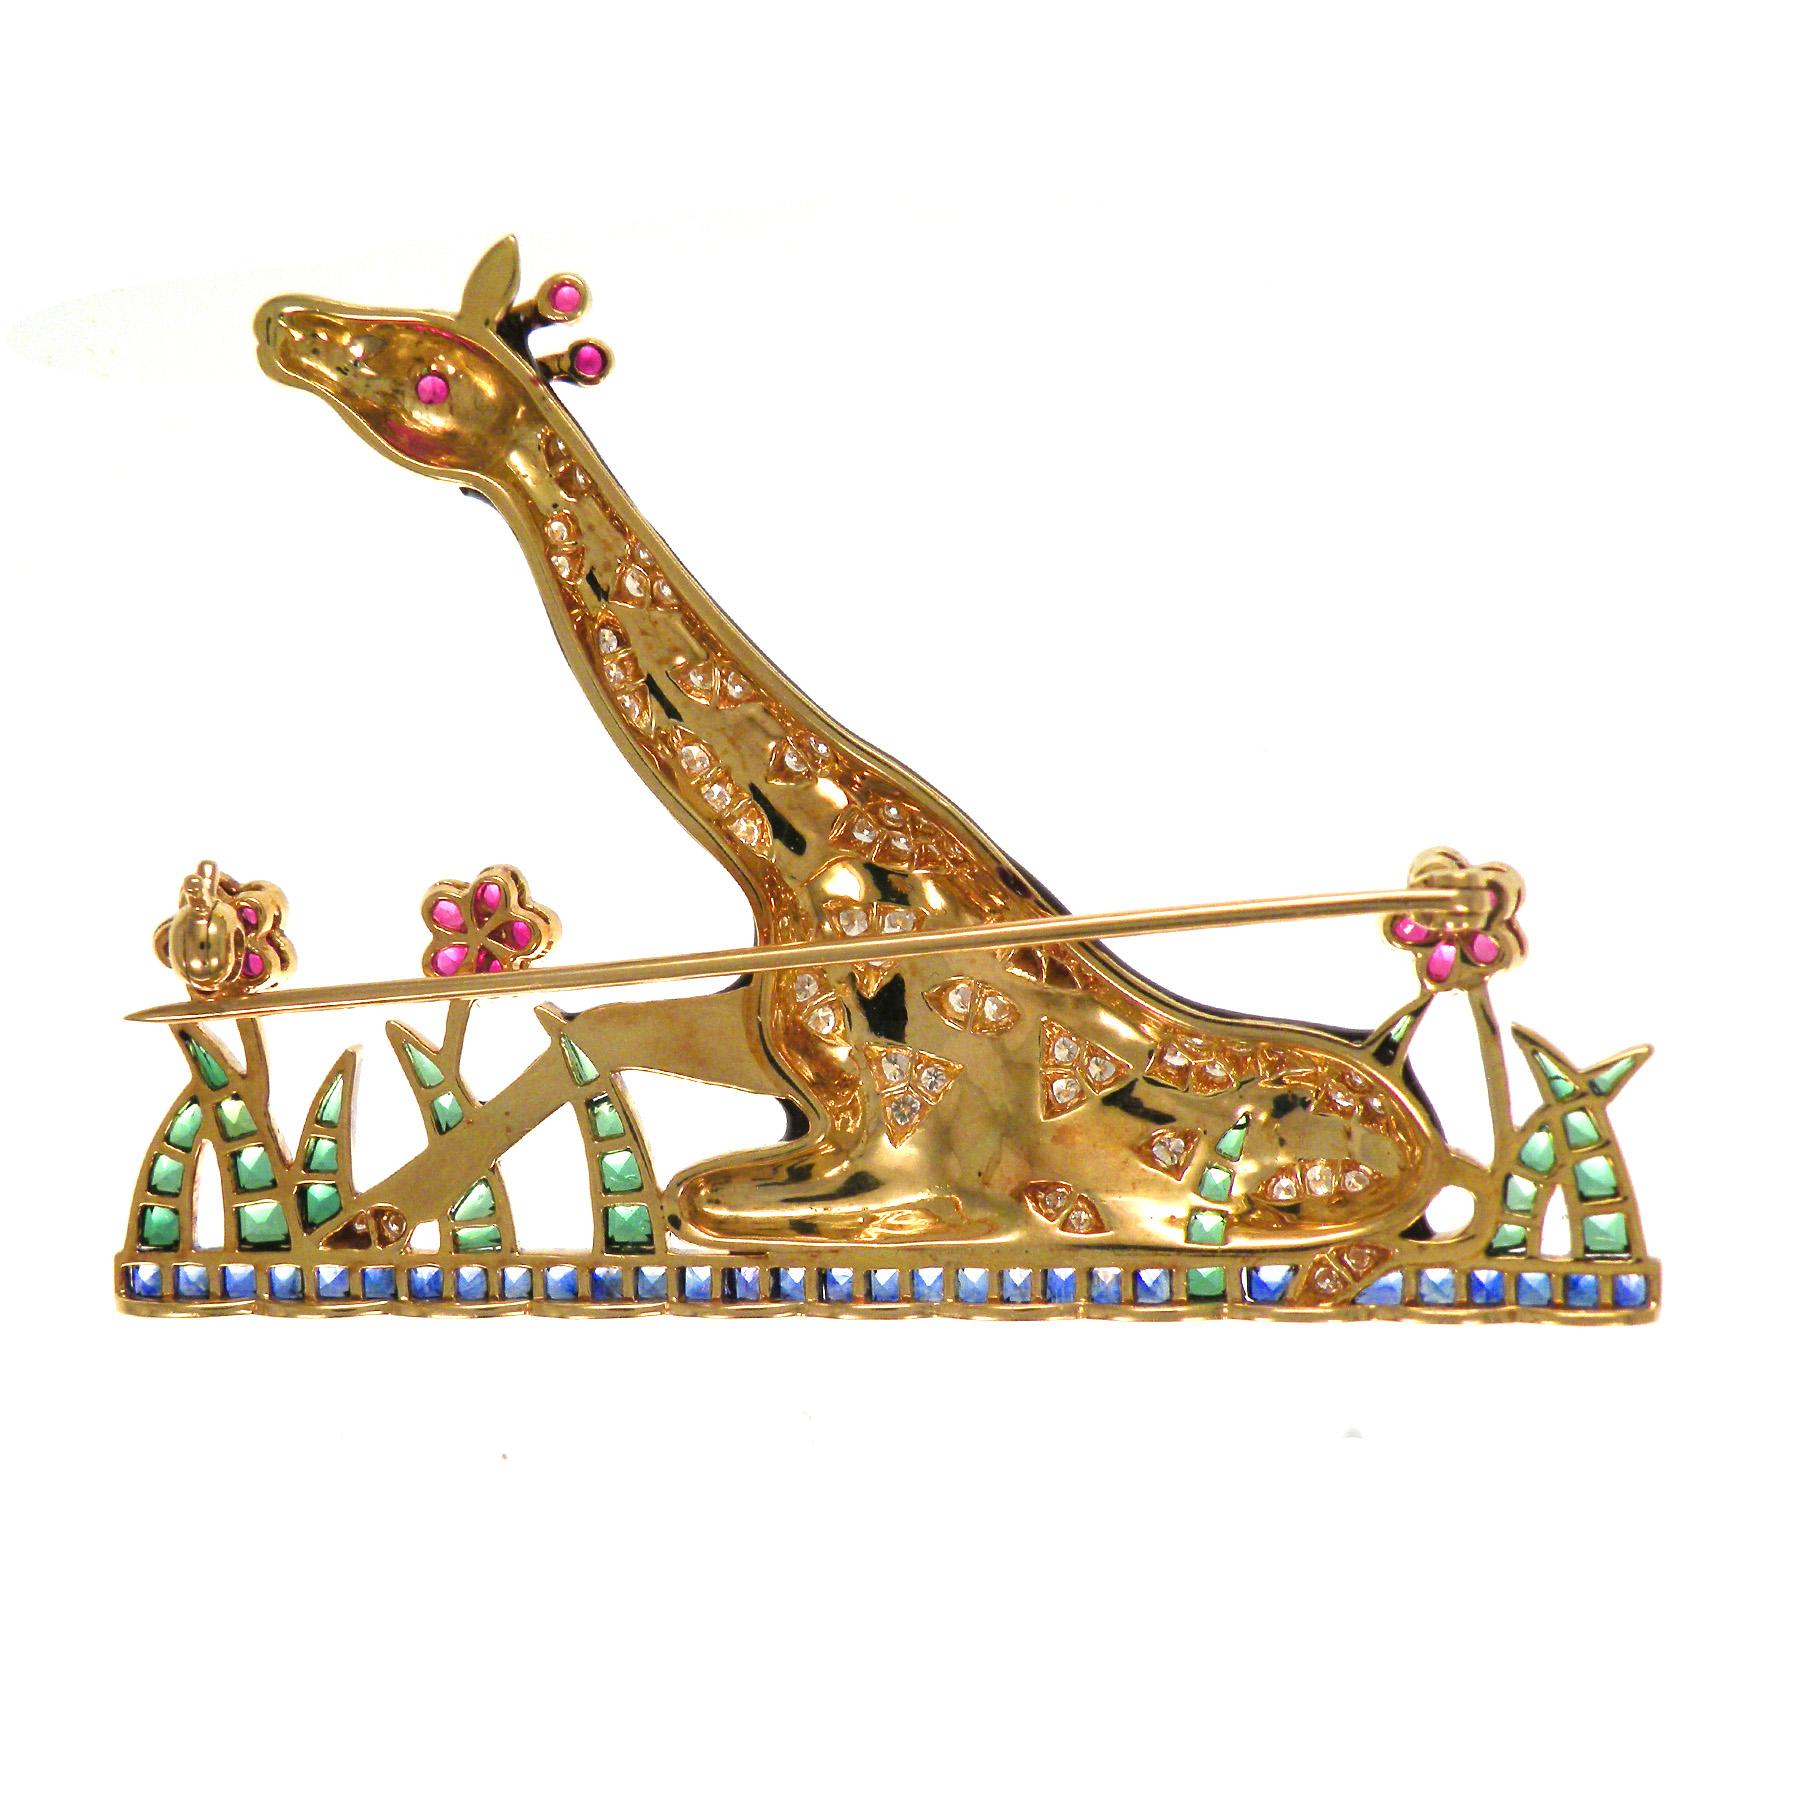 Giraffes are the gentle creatures with gracefully long necks 
and is said to stretch out onto the heavens. 
This brooch will give the owner the ability to reach opportunities 
that are not available to others.